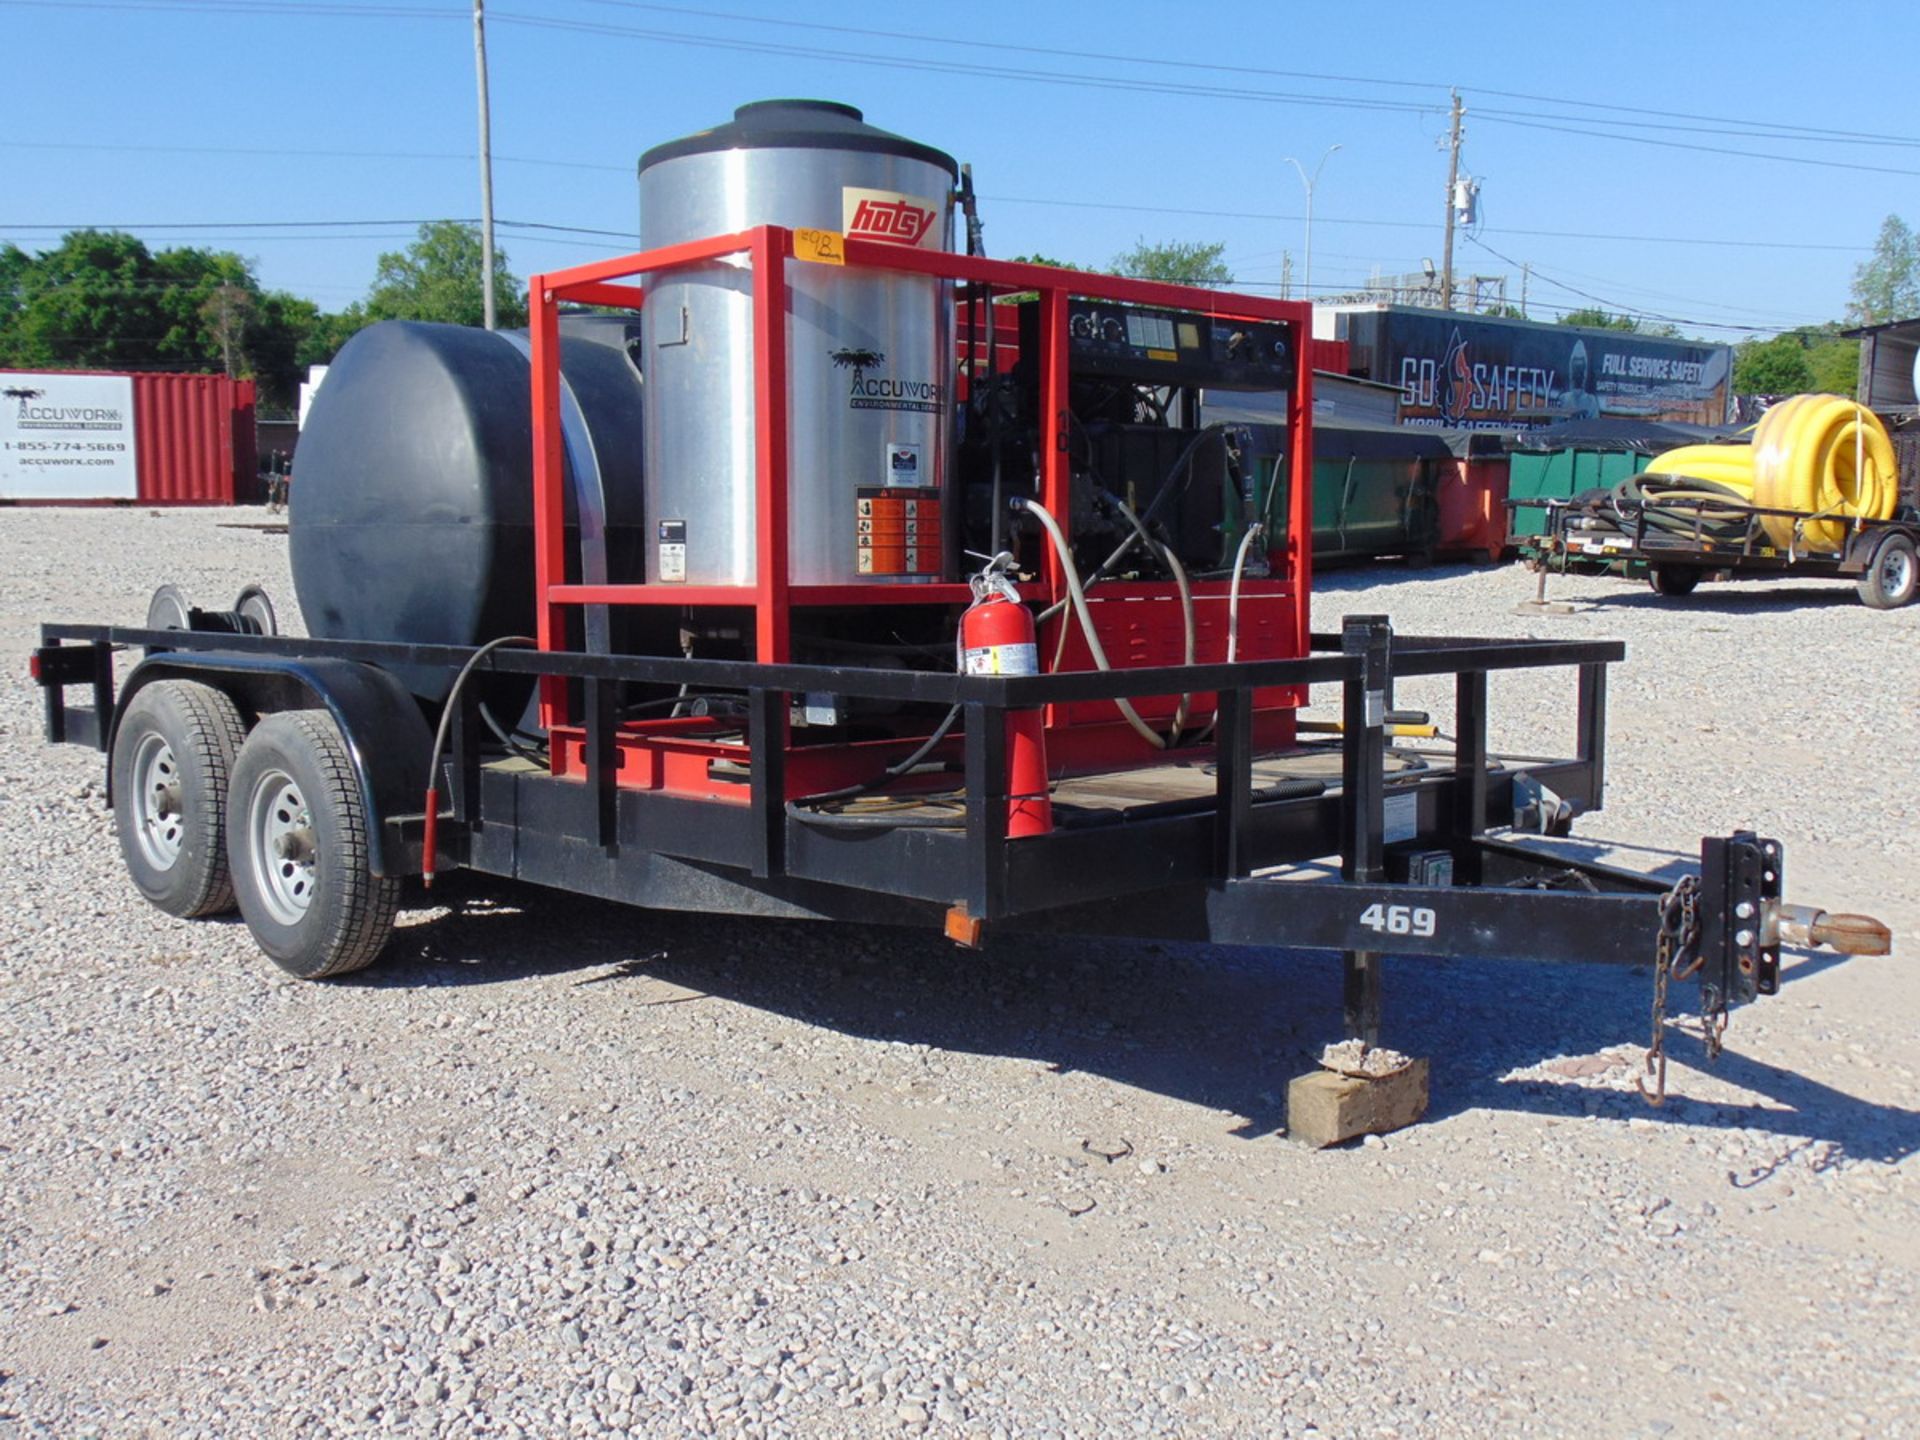 2011 Hugh Utility 16' T/A Utility Trailer Hotsy 2,500 PSI 9.5 GPM Pressure Washer (655 Hours), Water